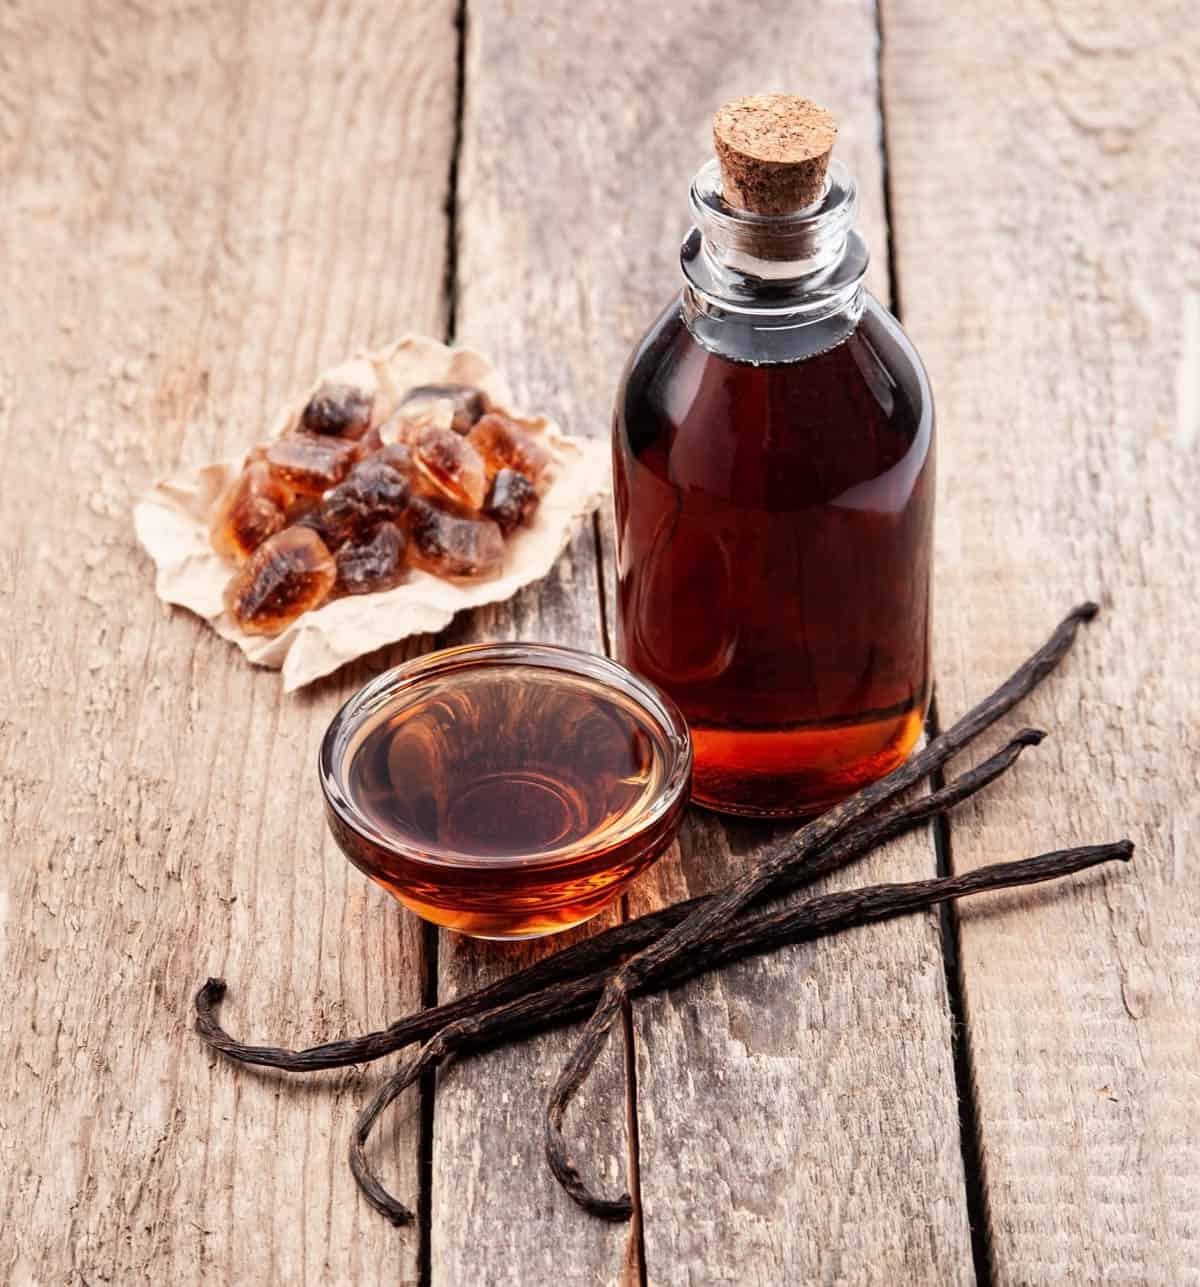 How to make vanilla extract at home - homemade vanilla extract stored in a glass jar.